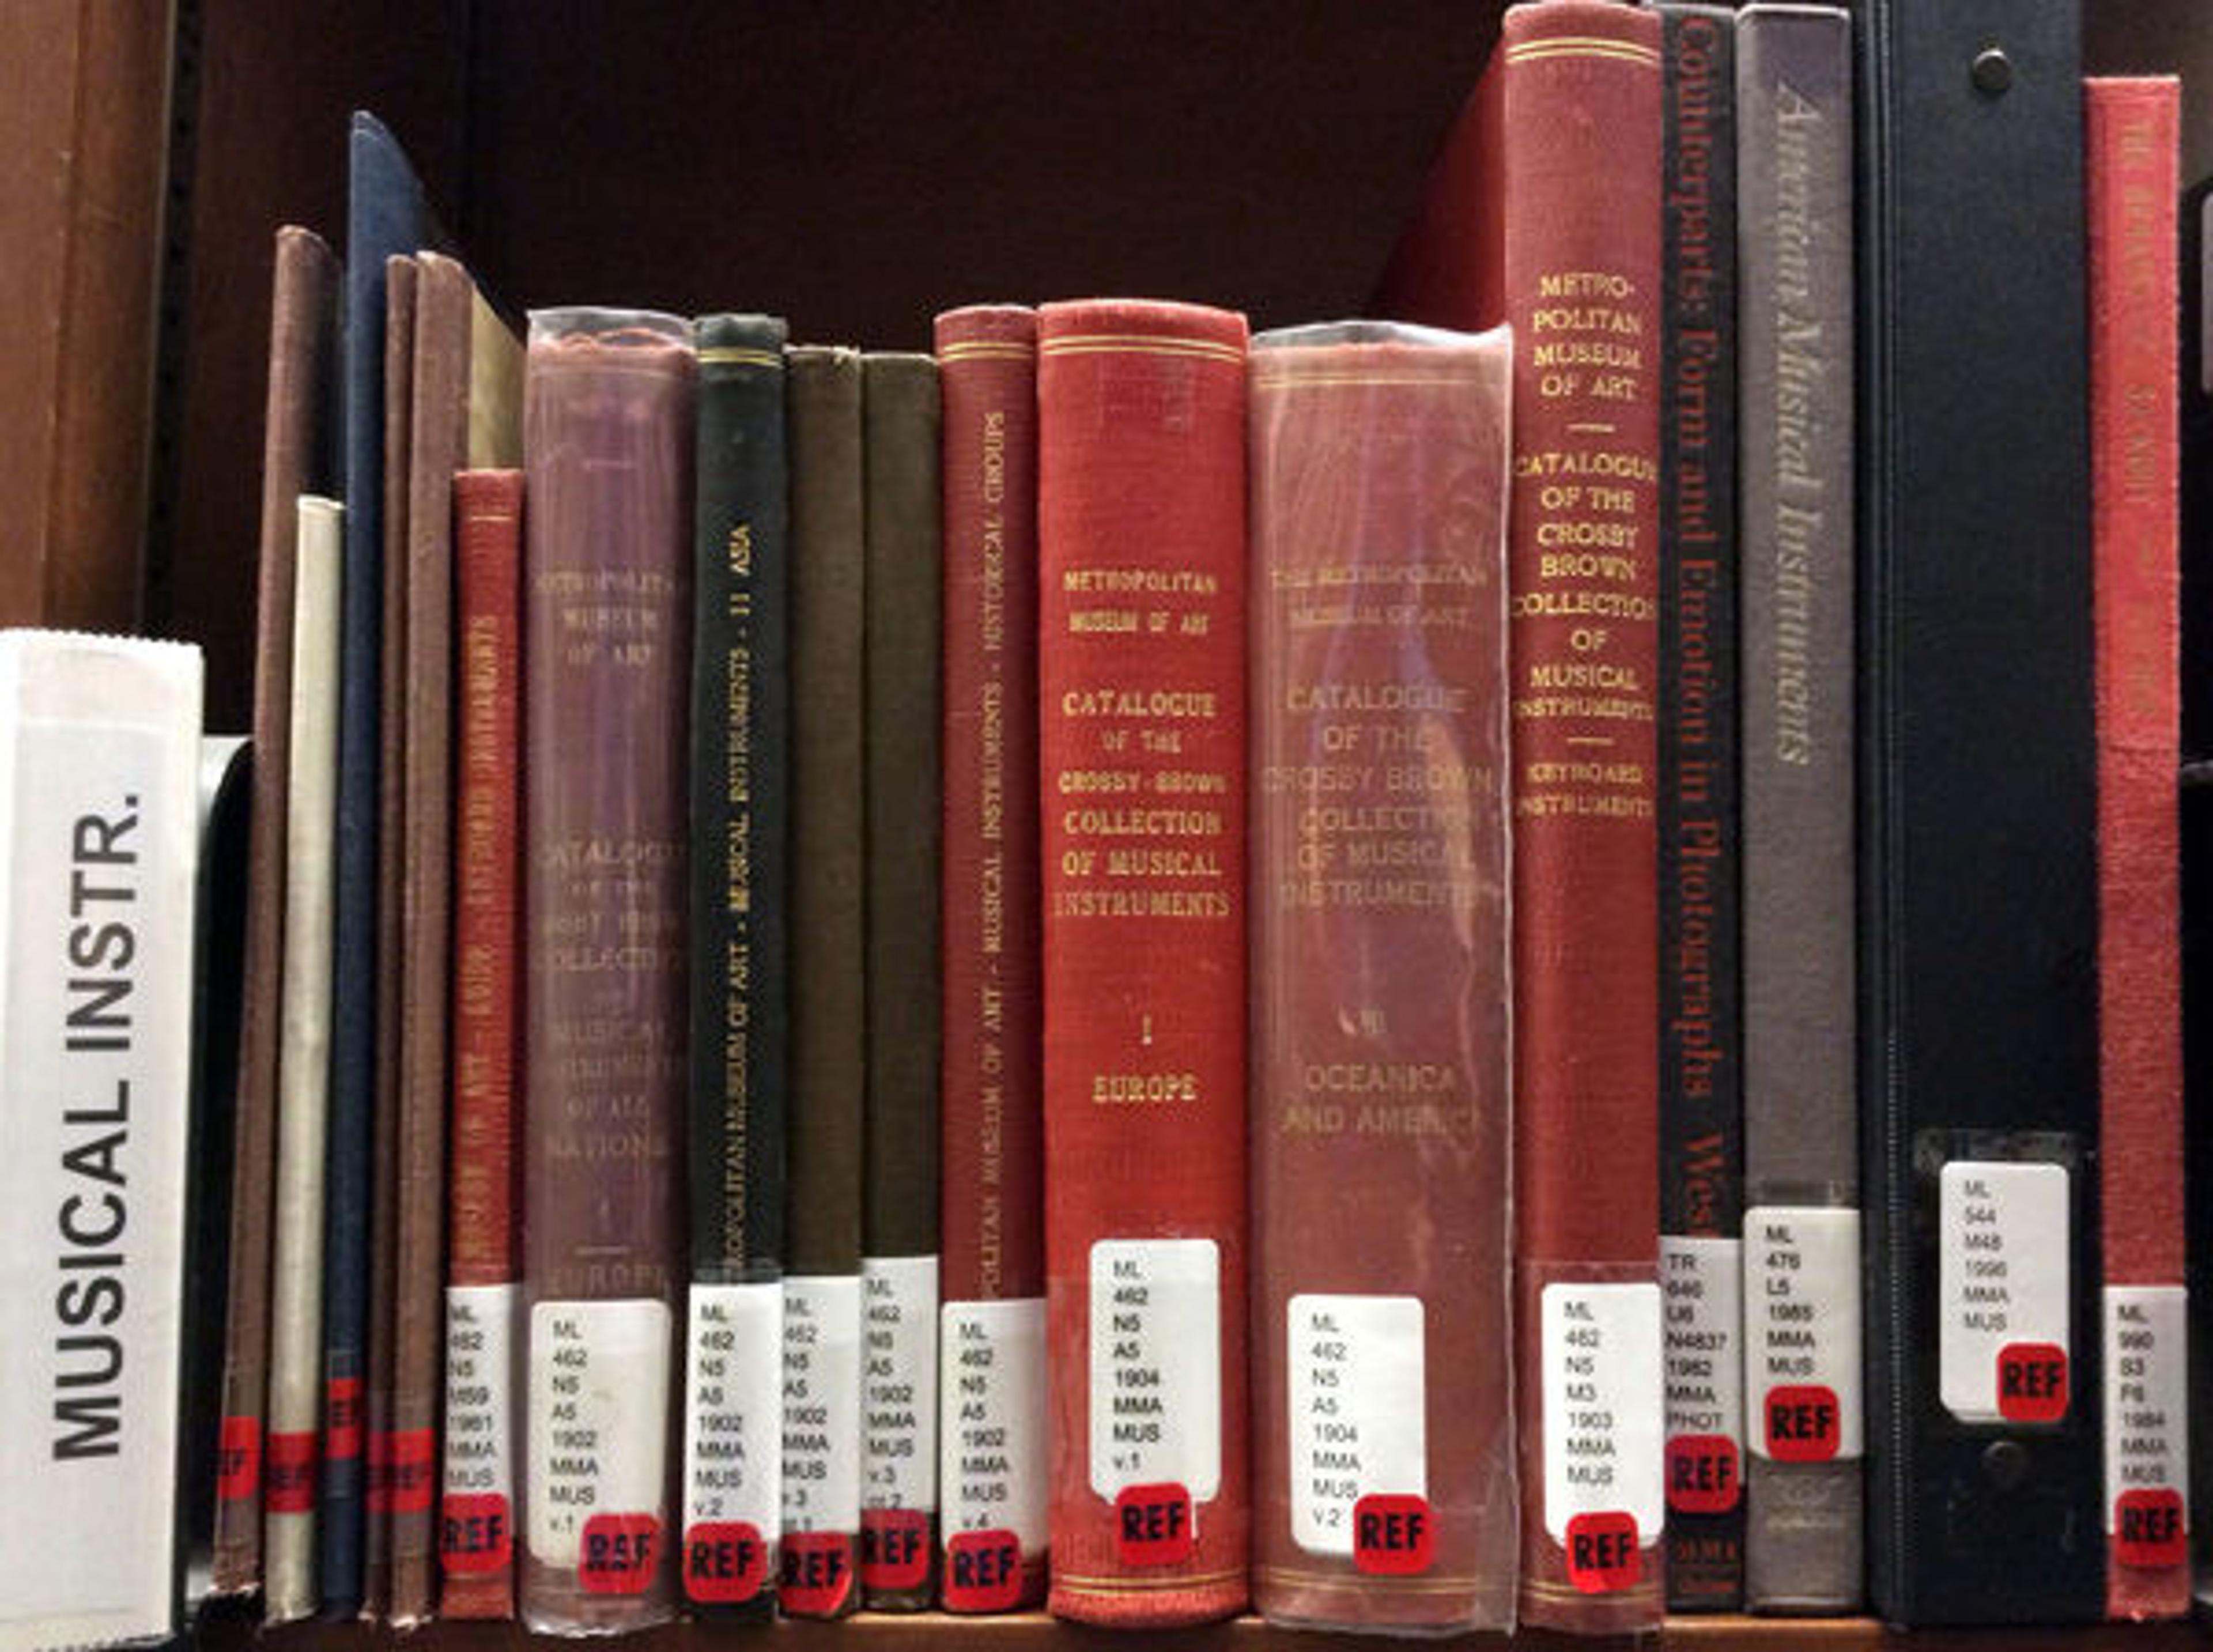 Crosby Brown catalogues in Watson Library's Reference Collection